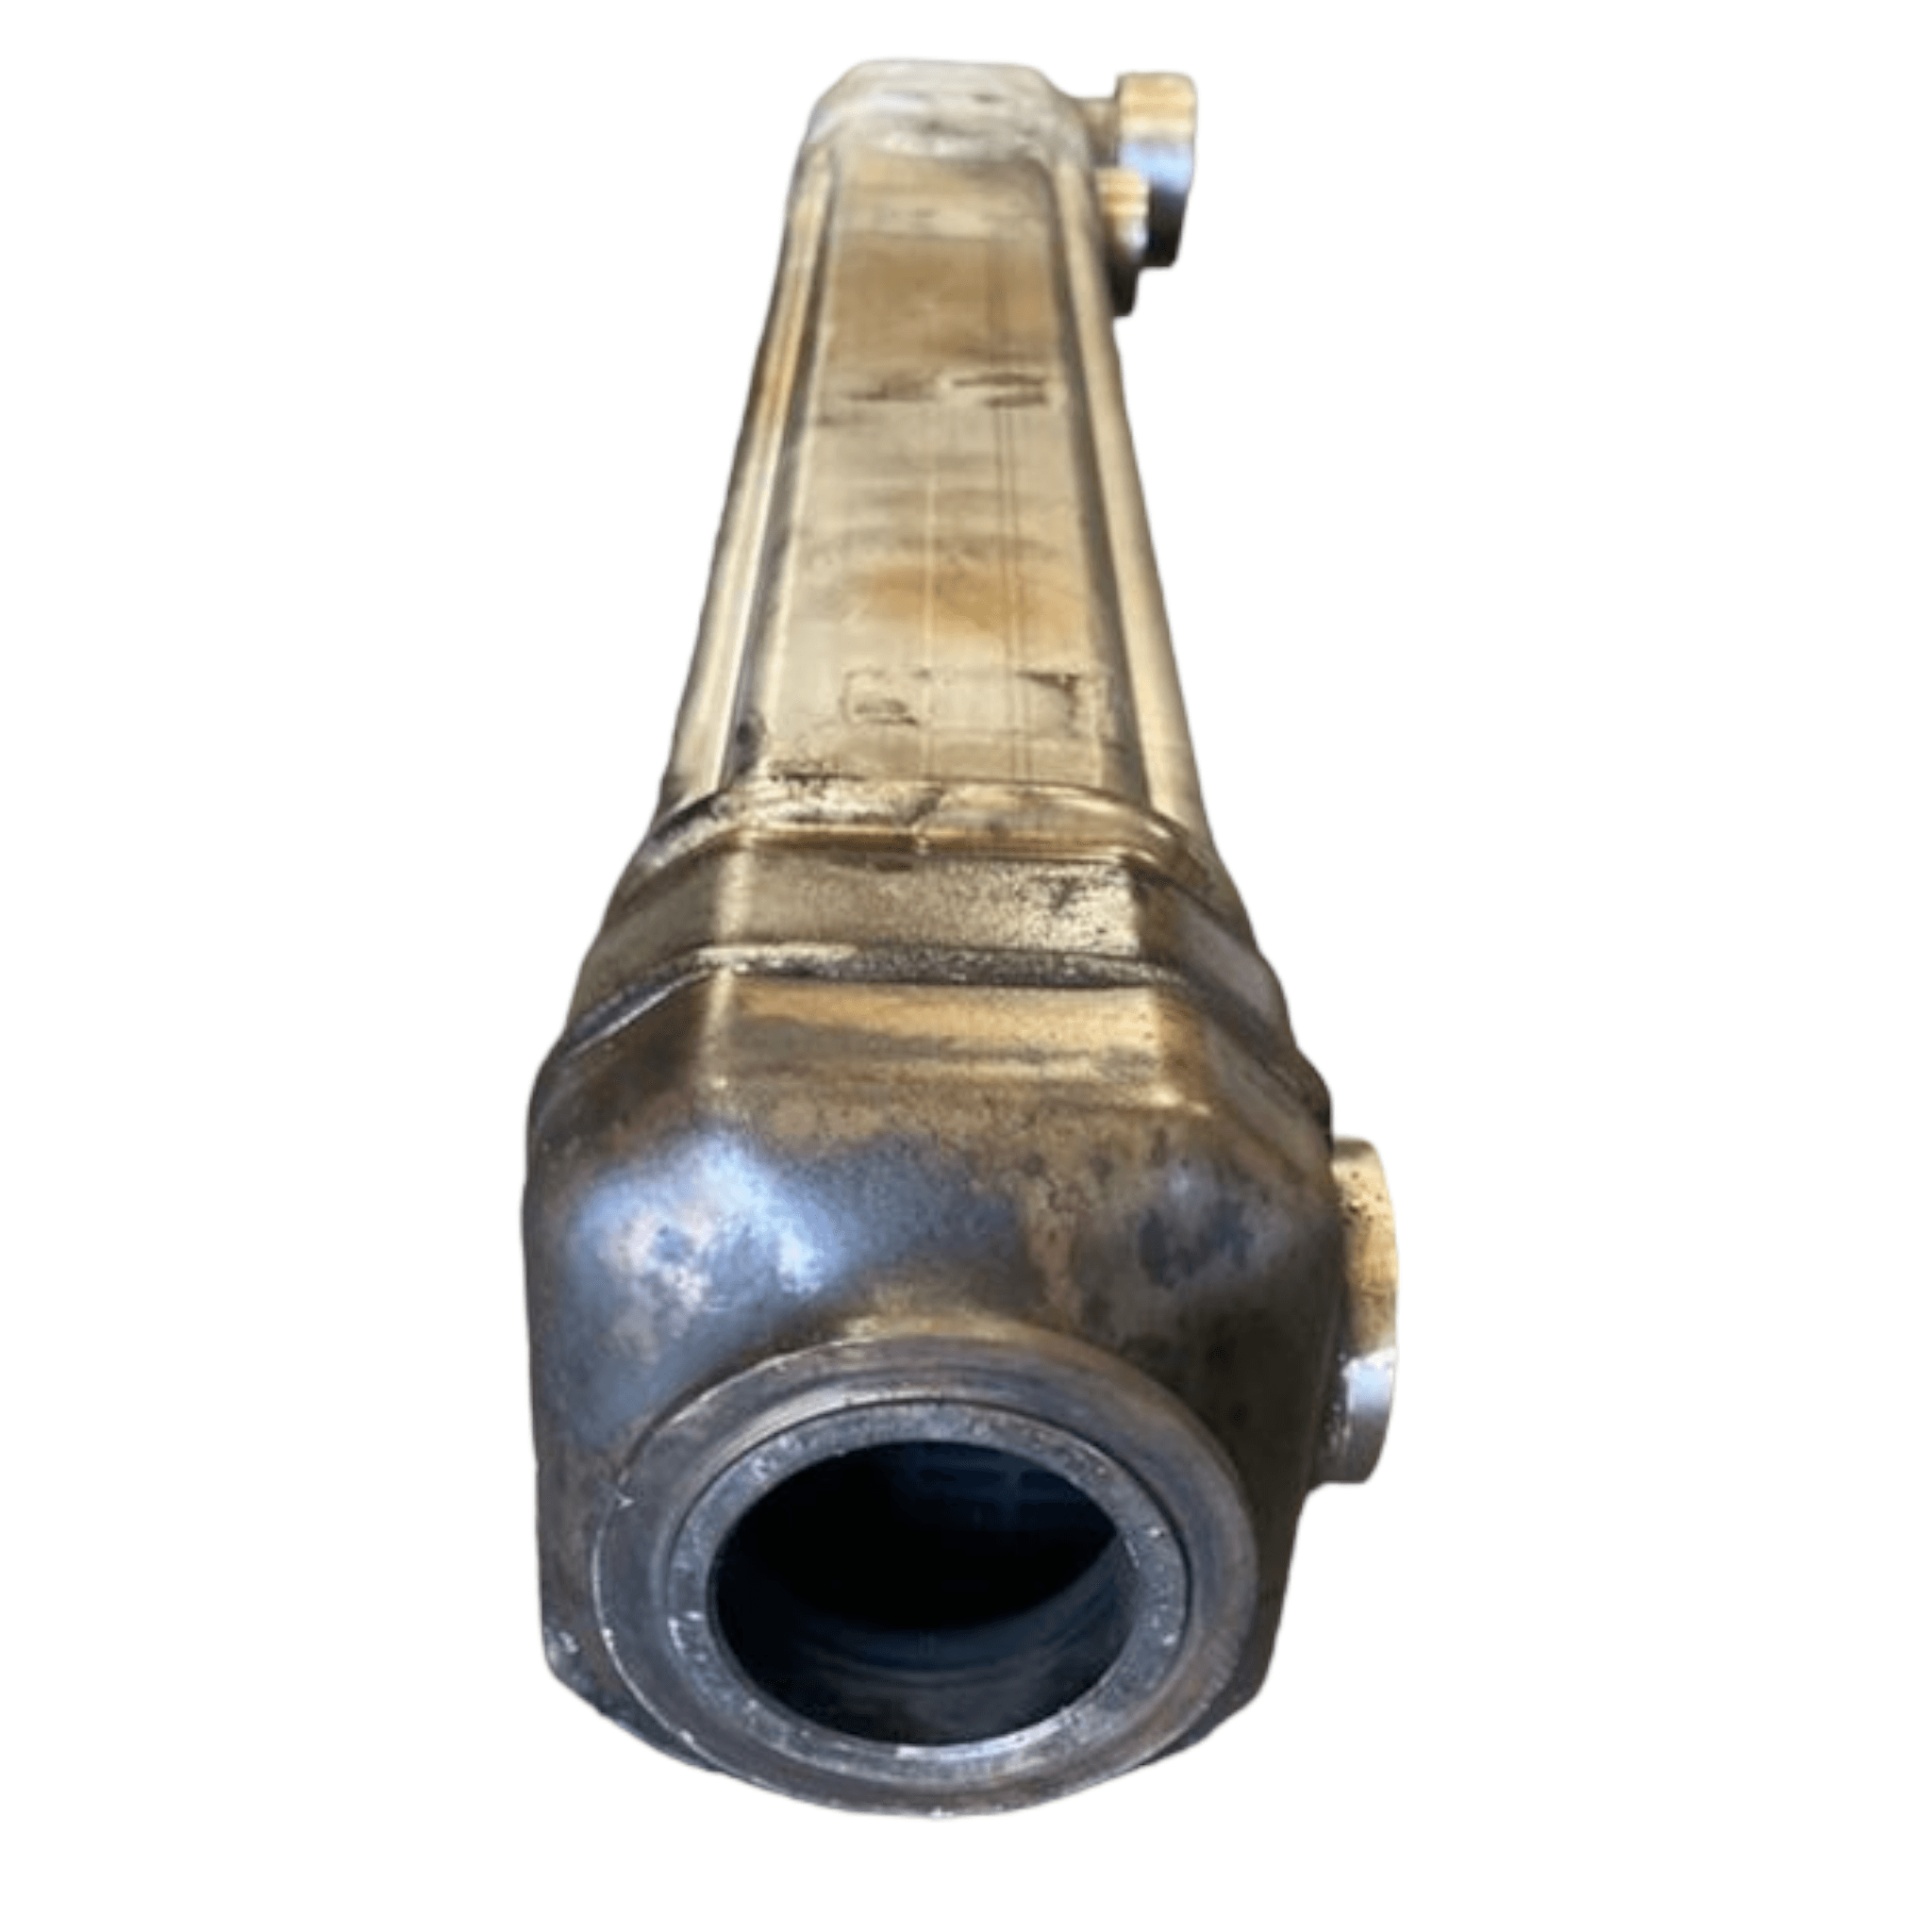 A4721400475 Genuine Detroit Diesel Egr Exhaust Gas Recirculation Cooler Used - ADVANCED TRUCK PARTS